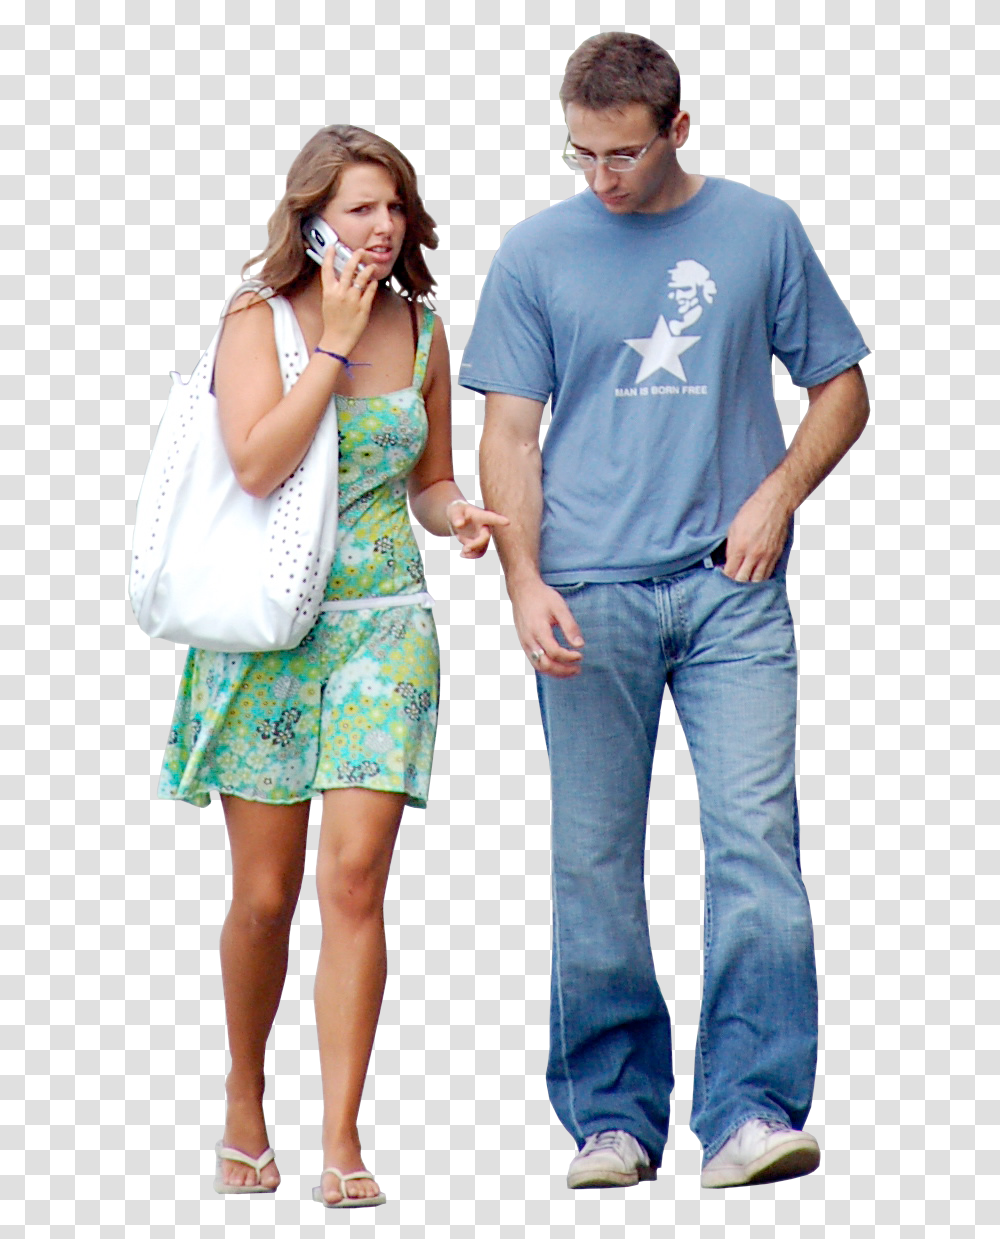 Download Displaying 20 Gt Images For People Walking, Clothing, Person, Pants, Jeans Transparent Png